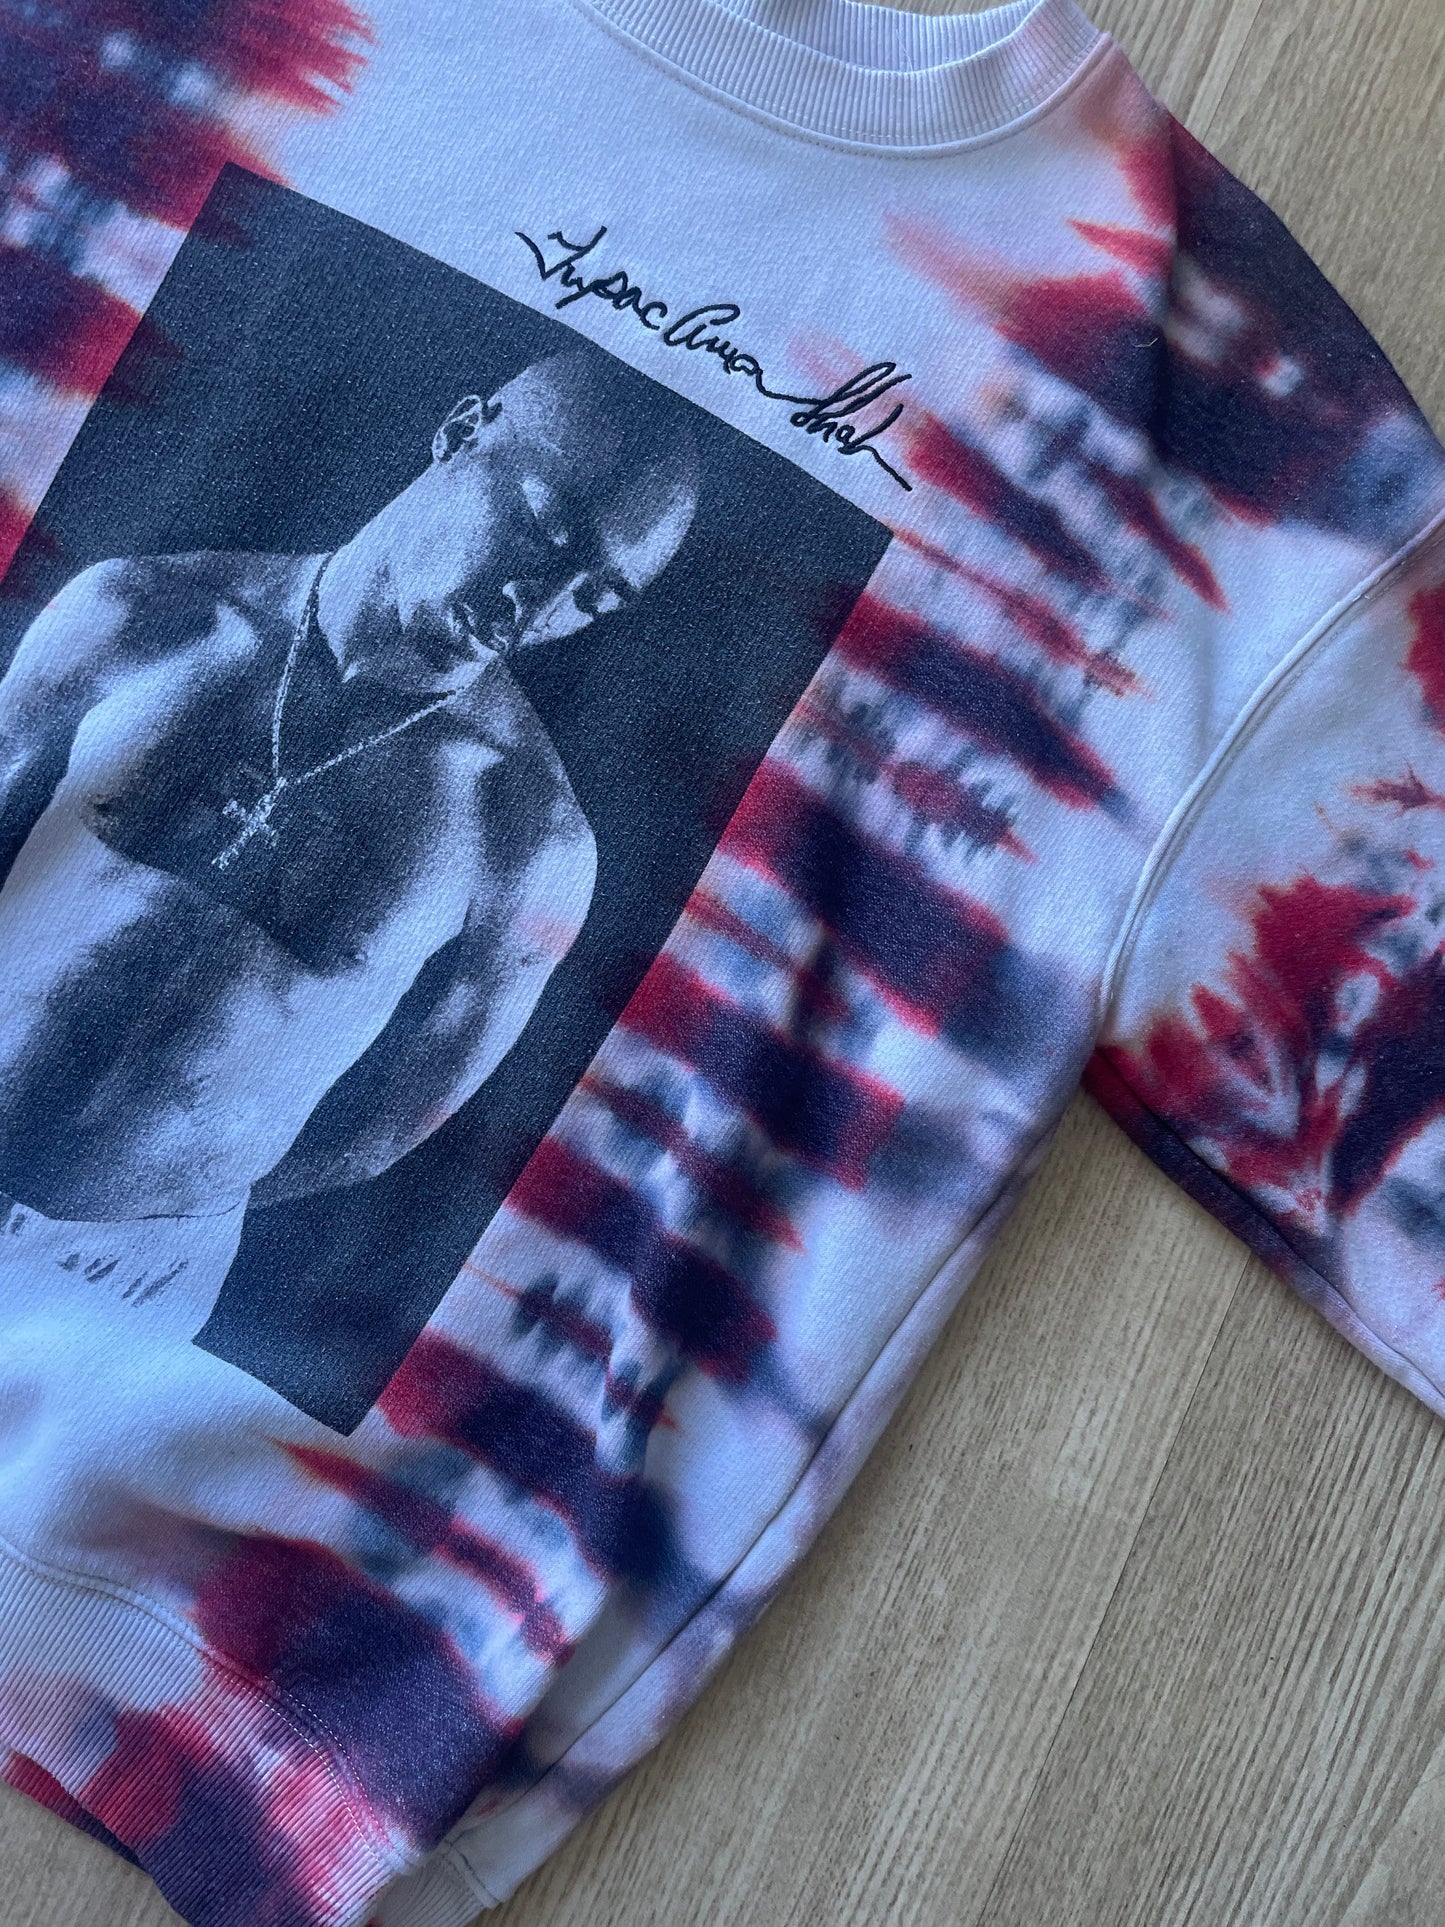 SMALL Women's 2Pac Tupac Shakur Handmade Tie Dye Long Sleeve Sweatshirt | One-Of-a-Kind Upcycled White, Black, and Red Crewneck